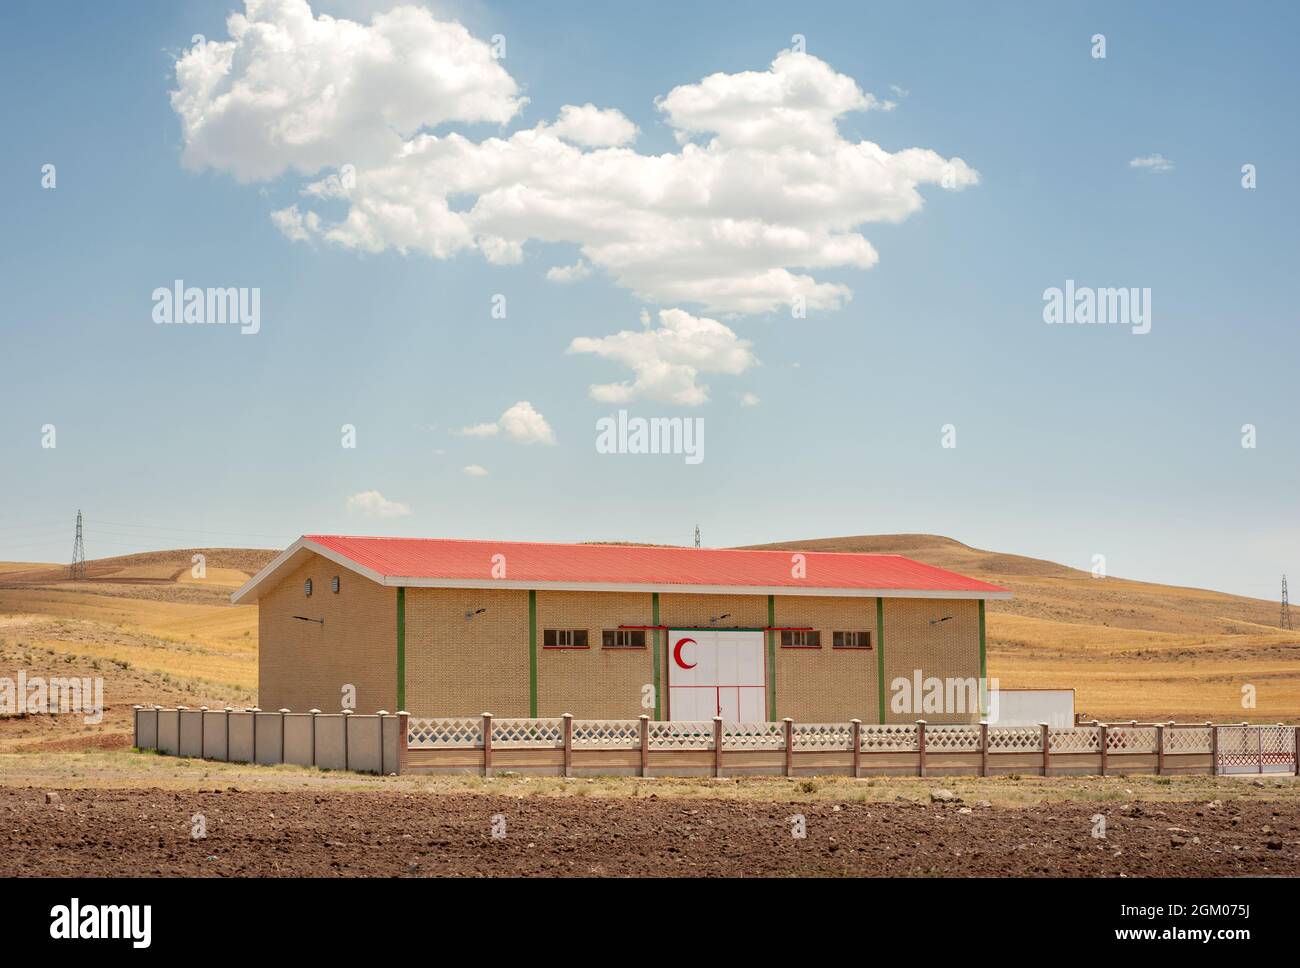 a Red Crescent Society building or hanger in iran with partly cloudy sky, kurdistan province Stock Photo